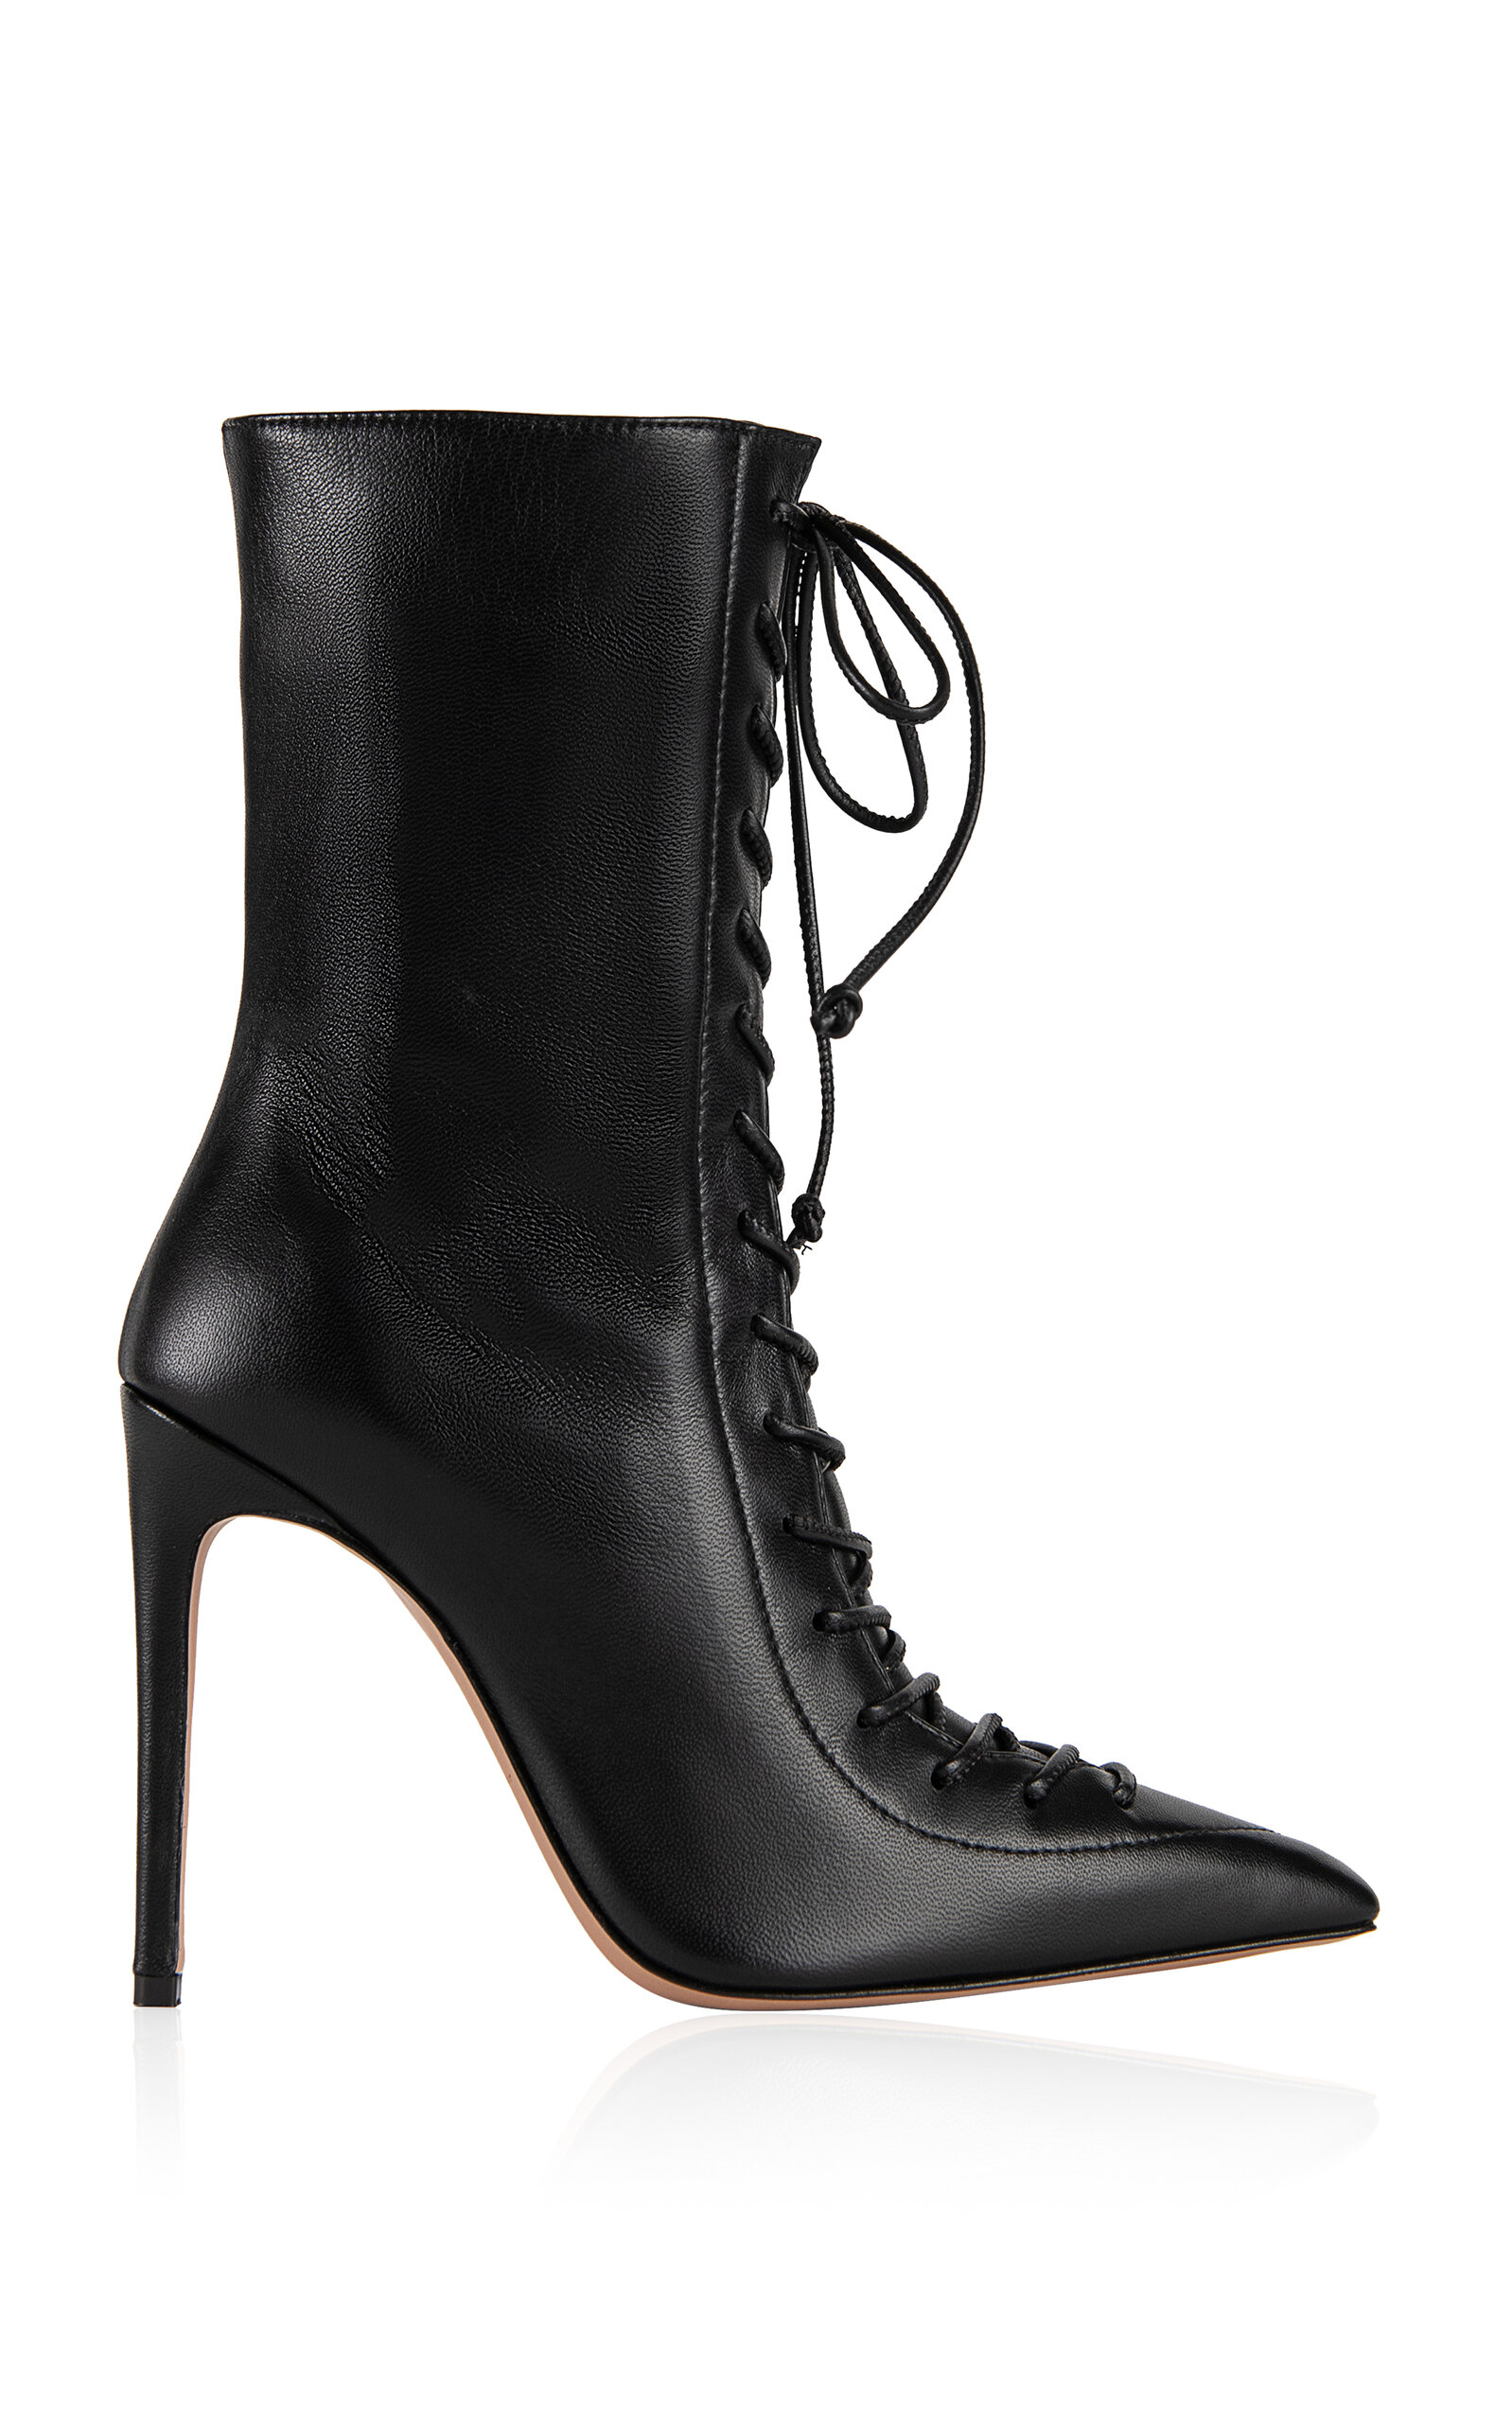 The New Arrivals Ilkyaz Ozel Lace-up Leather Ankle Boots In Black